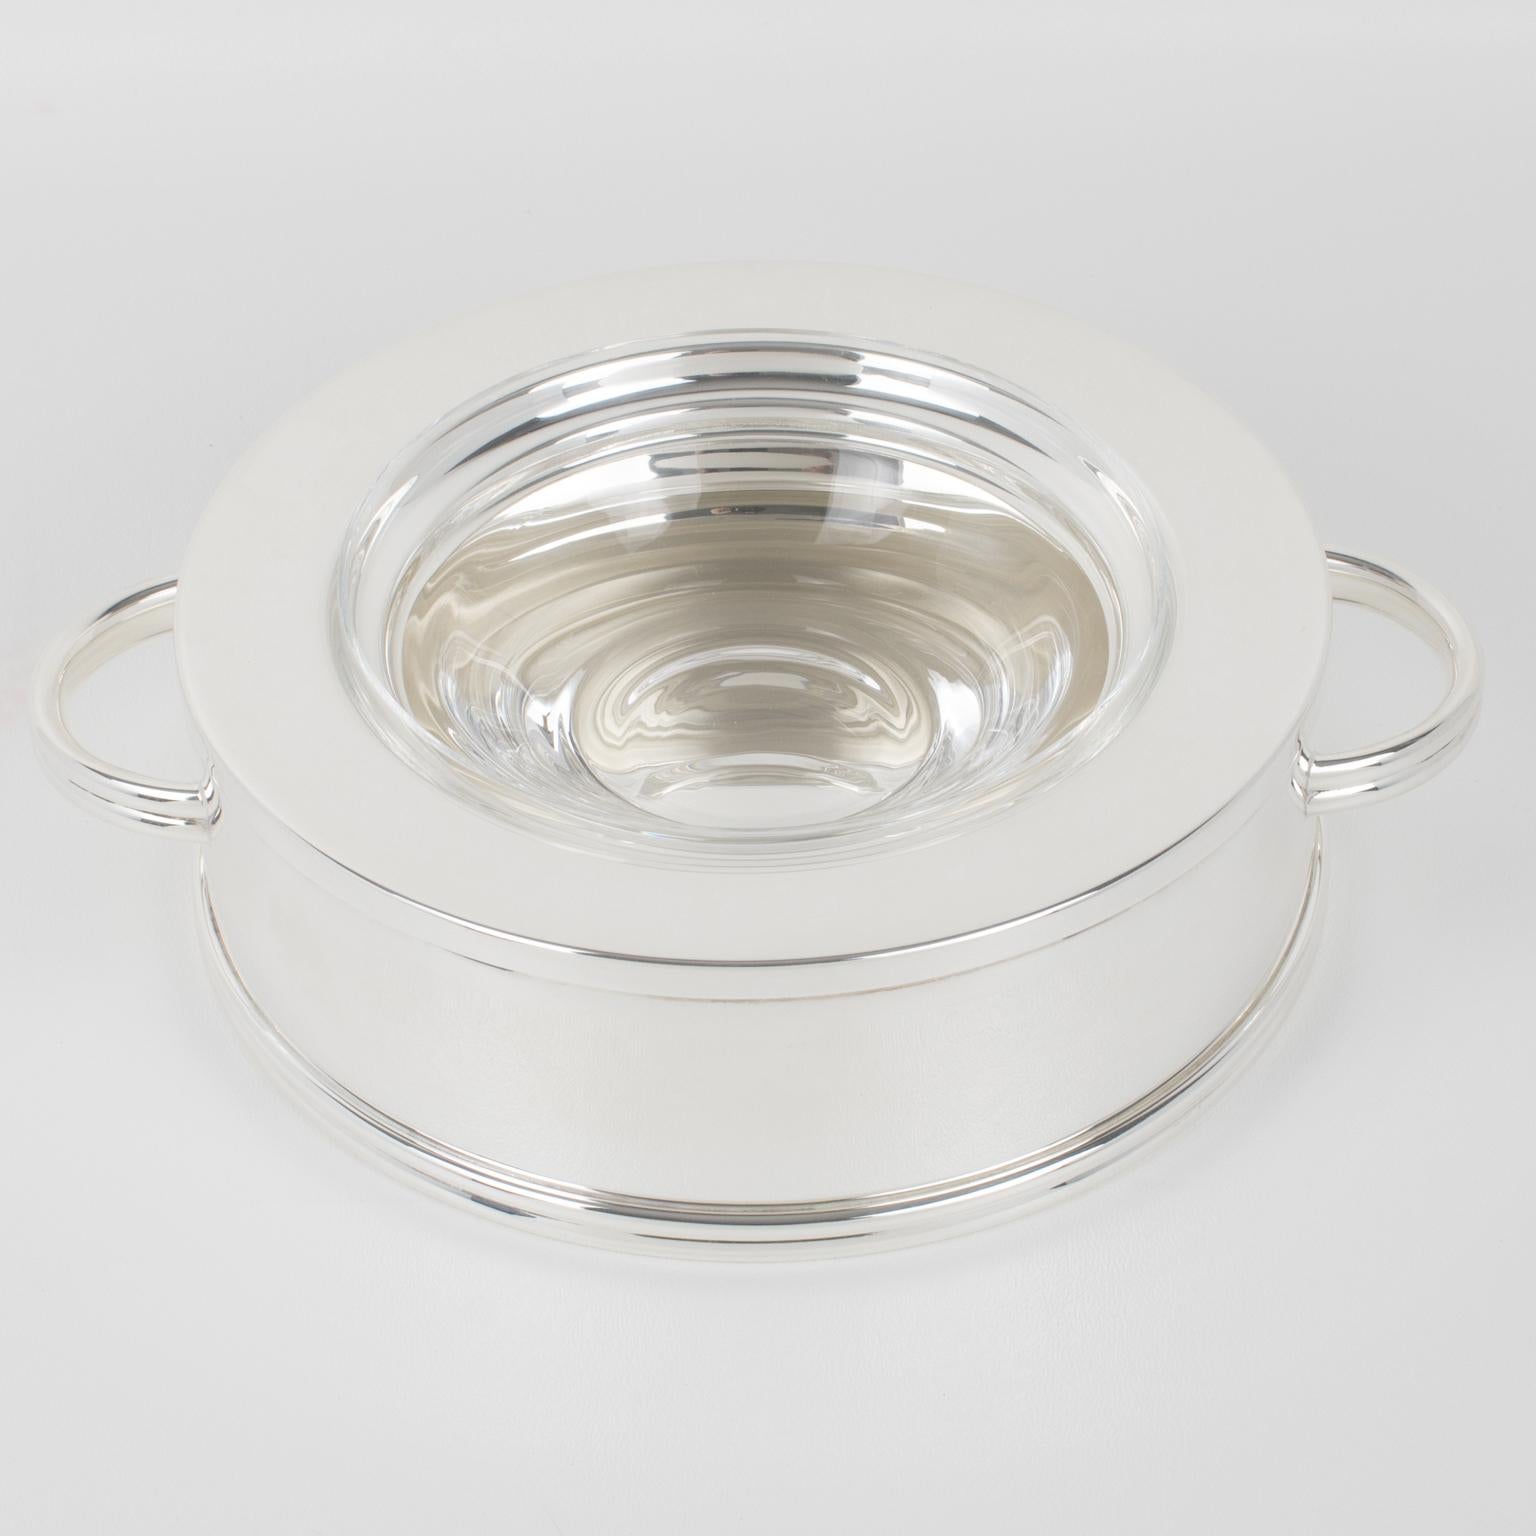 Modern Silver Plate and Crystal Caviar Bowl Dish Server by St Hilaire, Paris